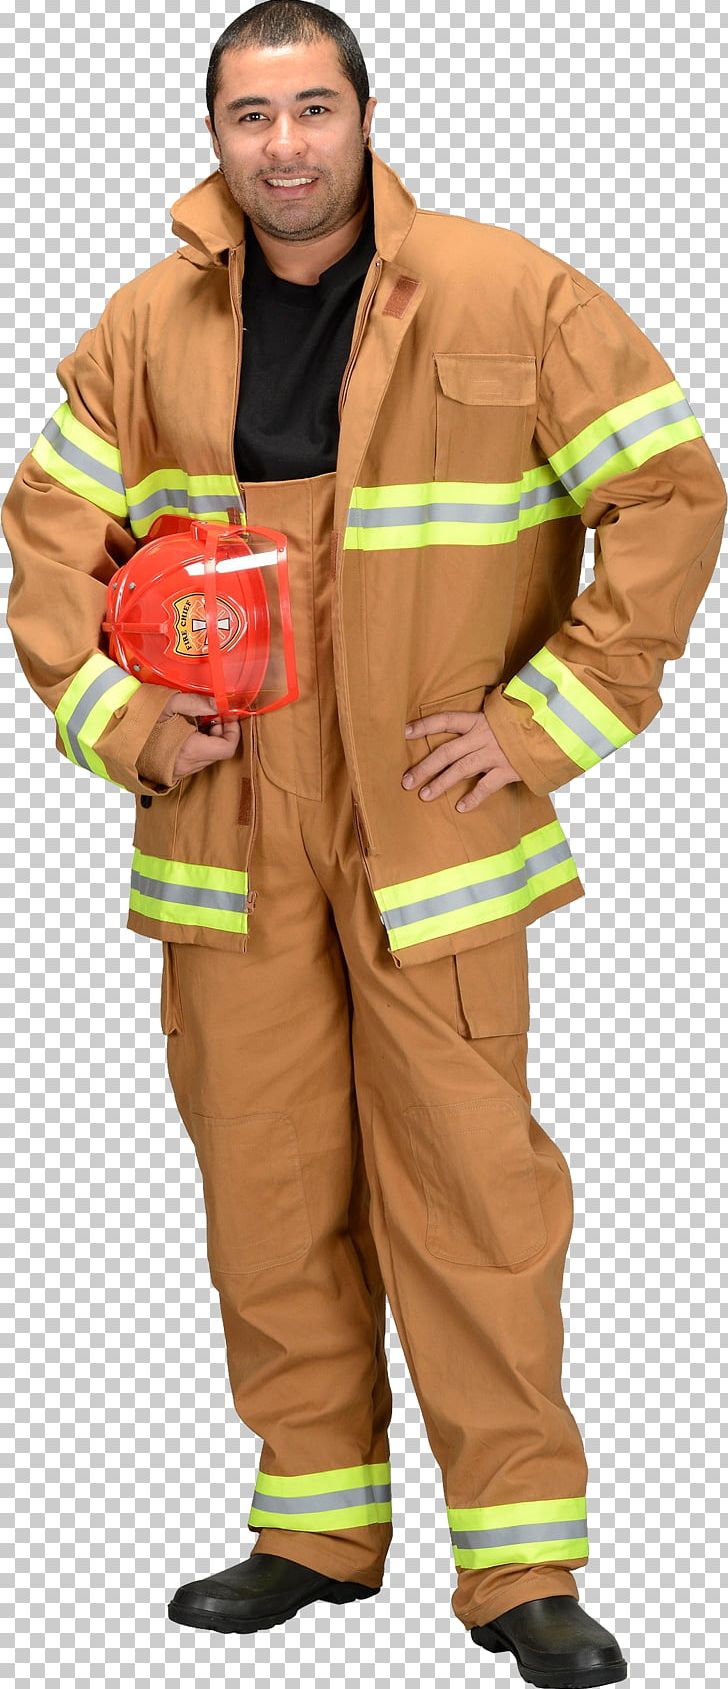 Firefighter Halloween Costume Bunker Gear Uniform PNG, Clipart, Adult, Bunker Gear, Clothing, Coat, Costume Free PNG Download